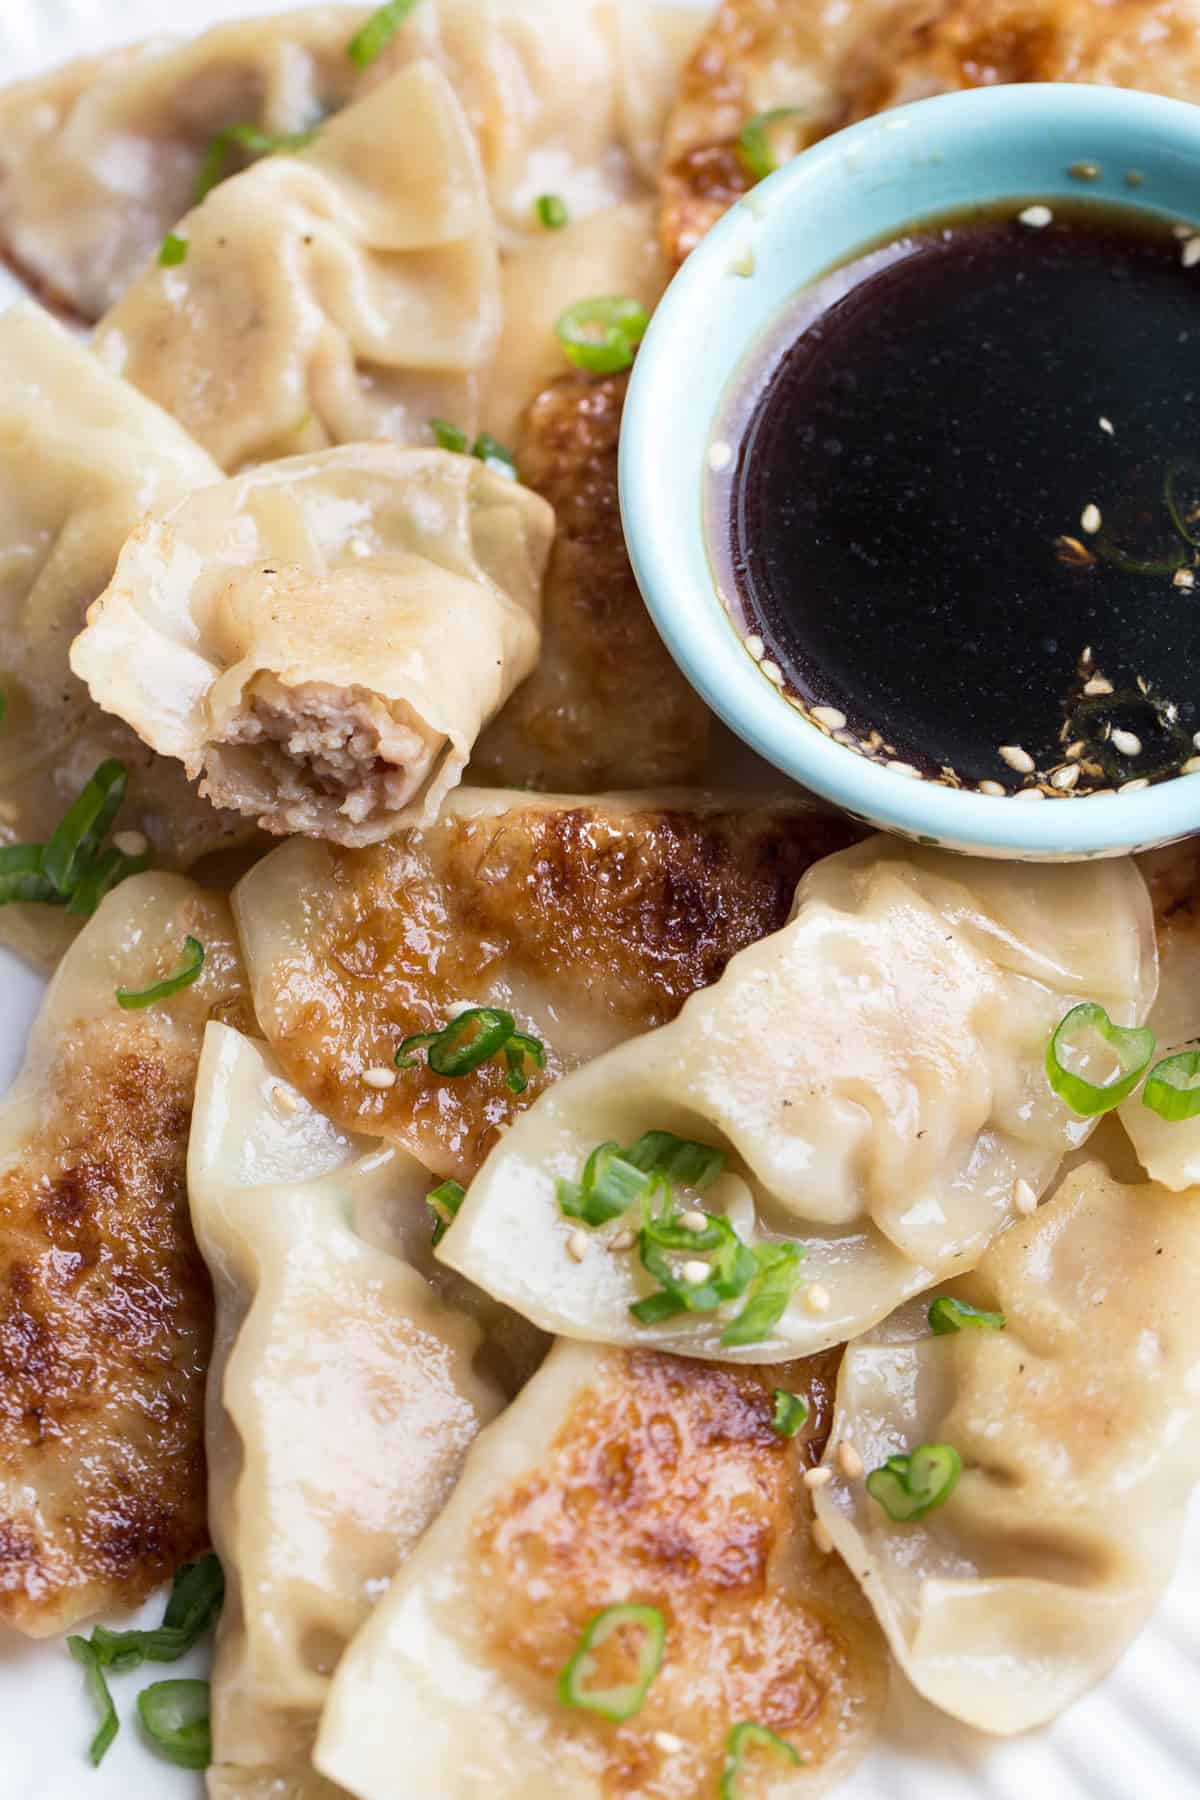 Chicken gyozas on a plate with a side dish of gyoza sauce.